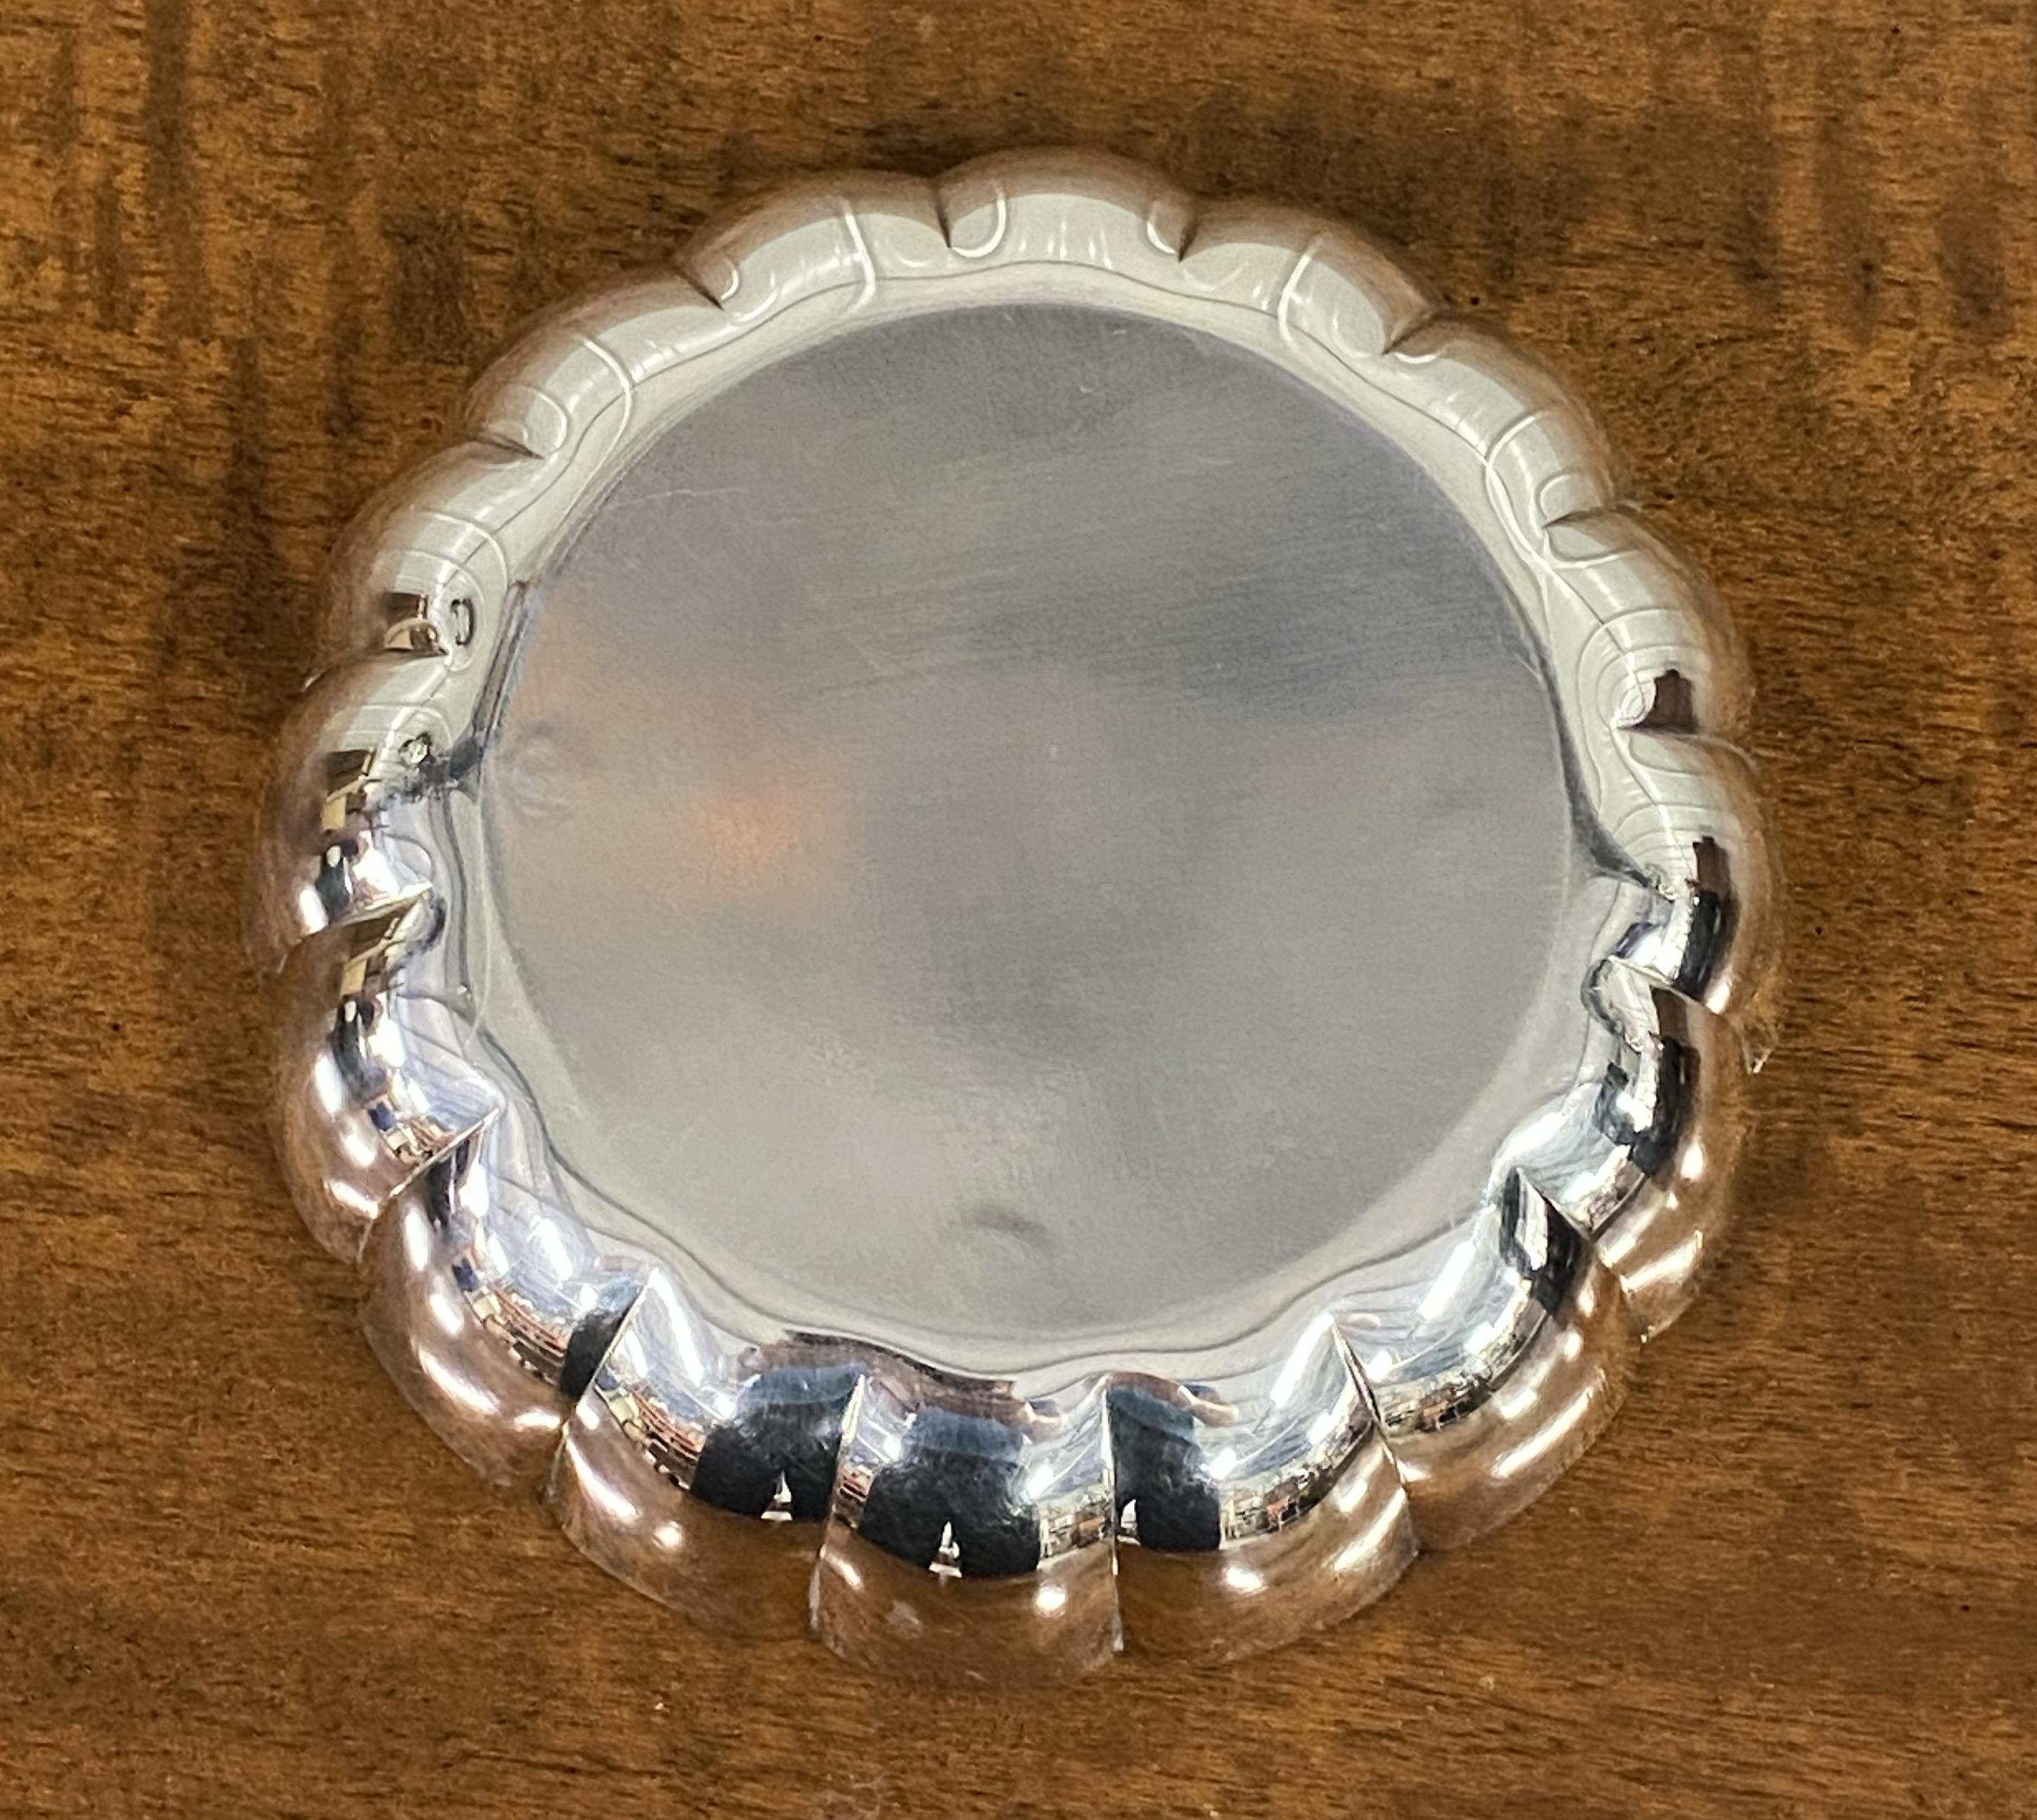 Stunning Rare 1979 Solid Sterling Silver Strawberry Dish or Bowl from Sheffield For Sale 13